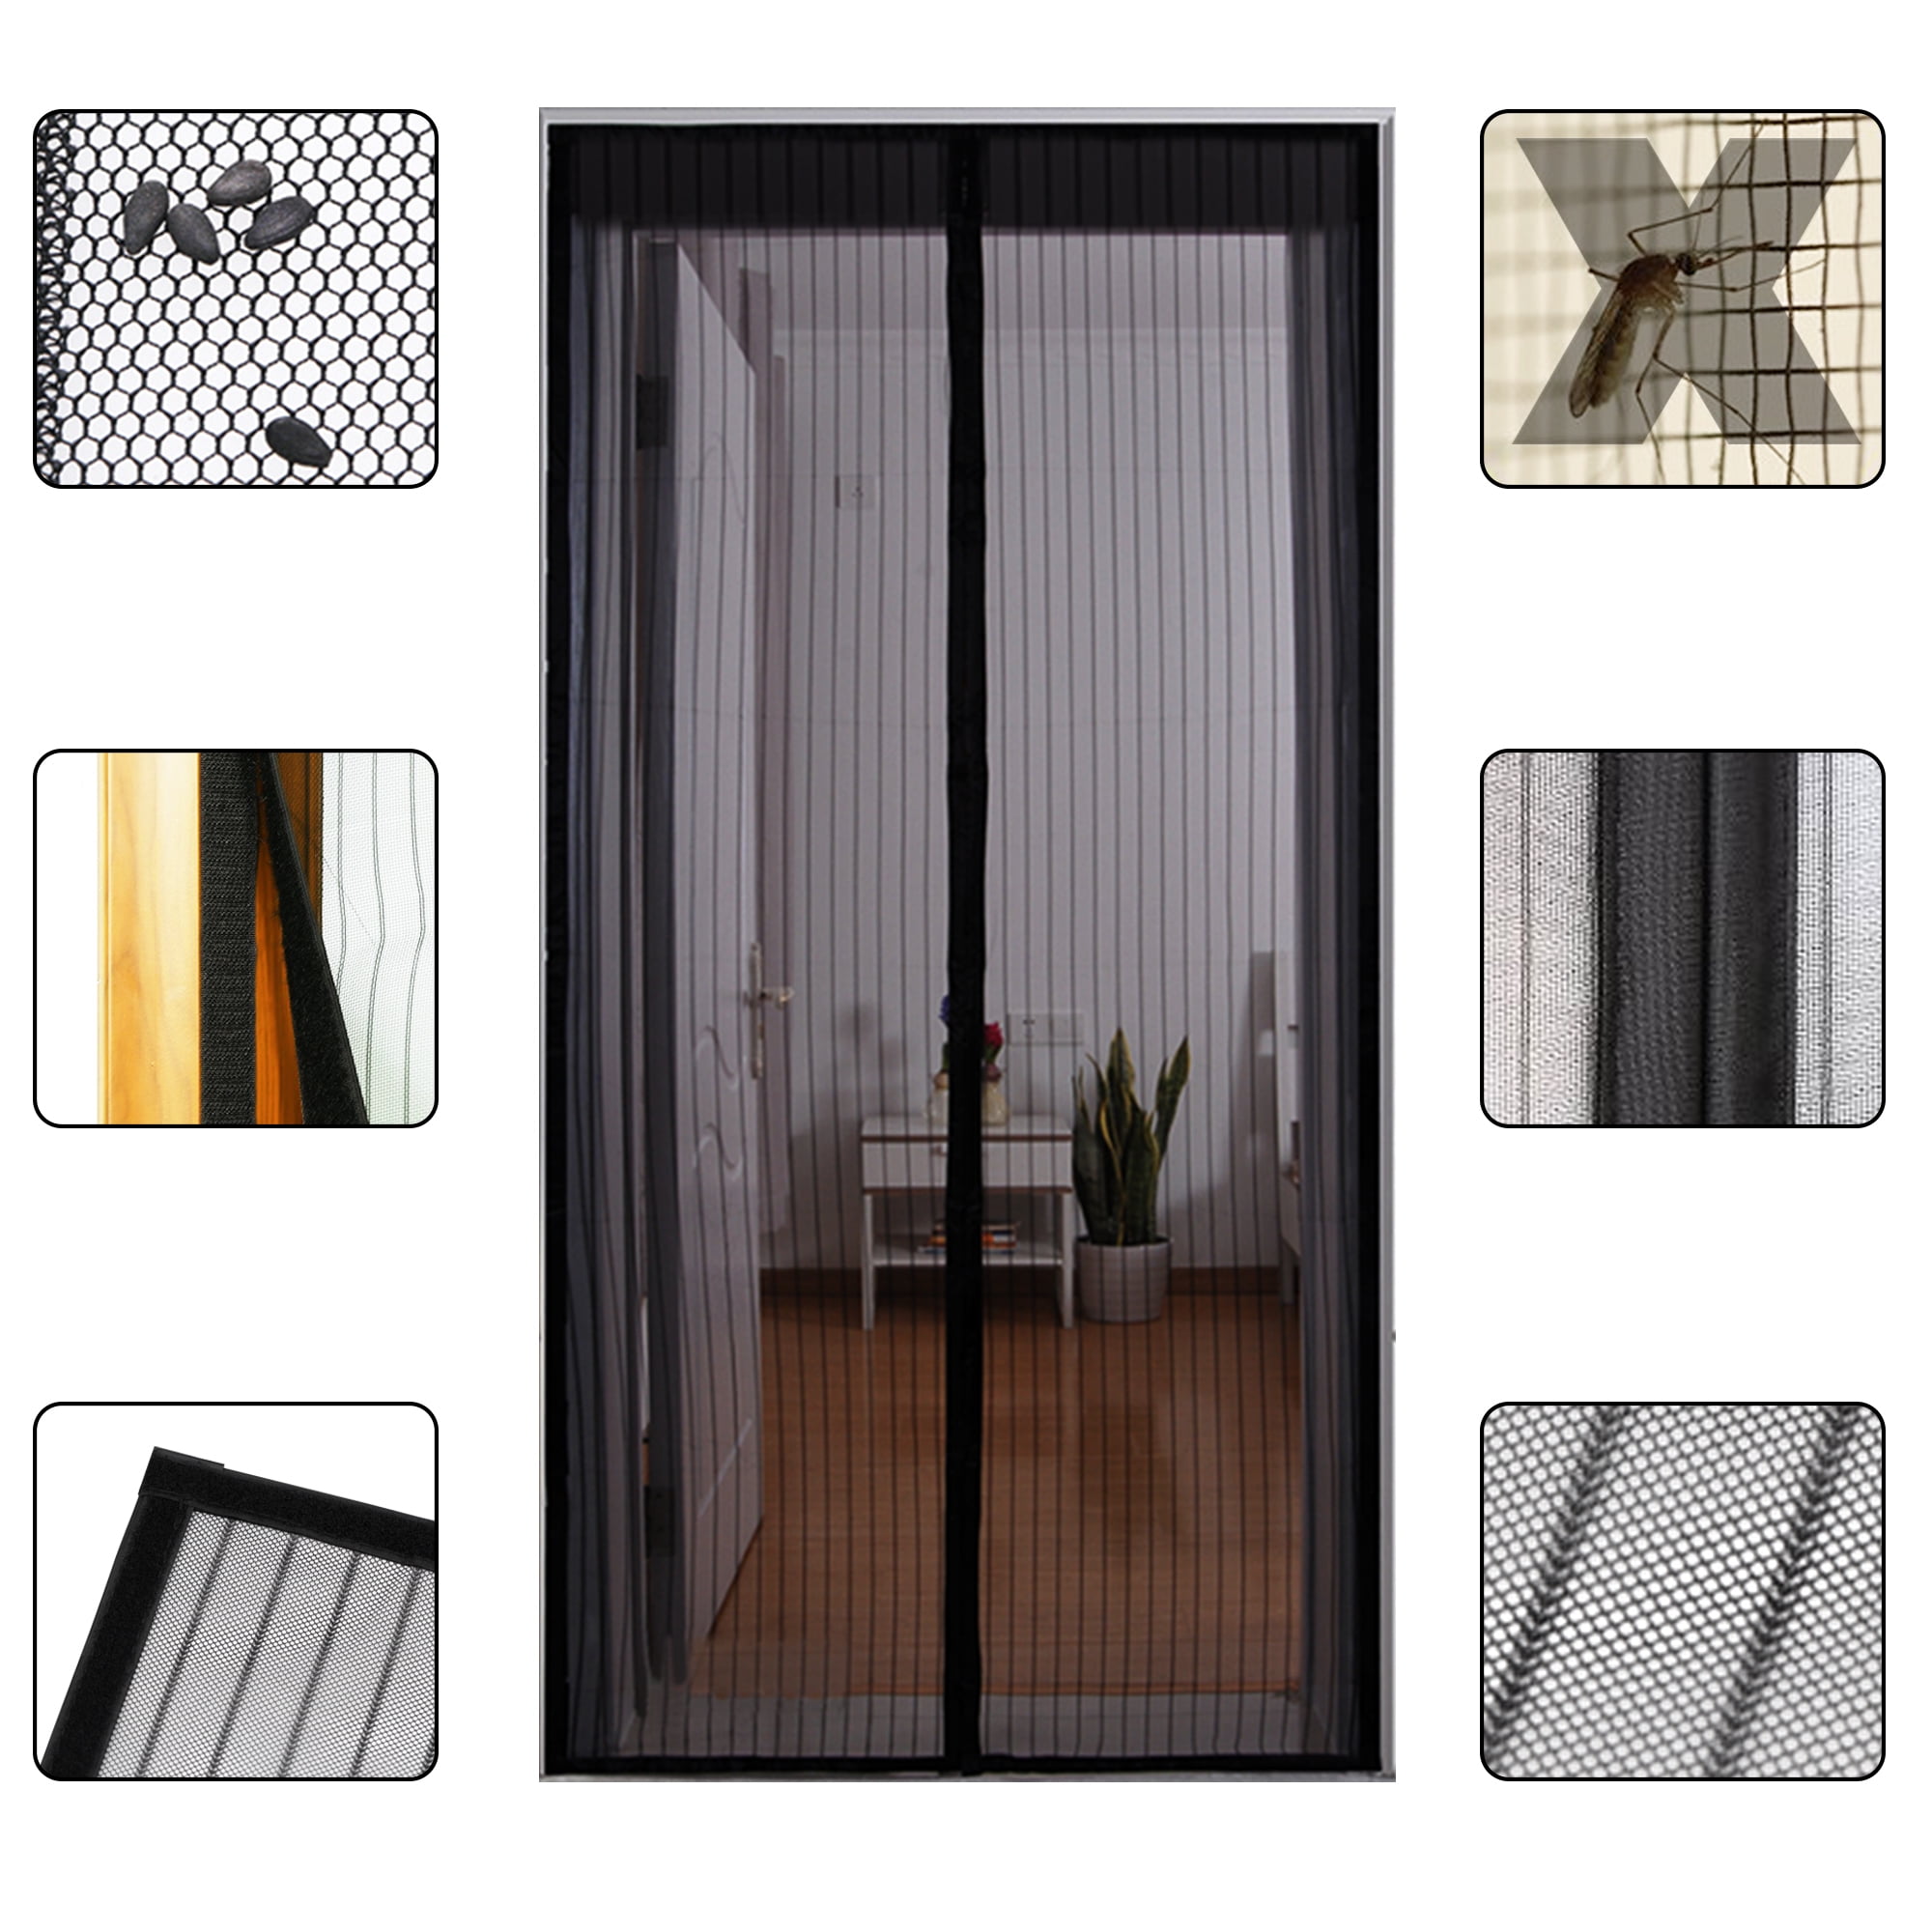 Magnetic screen door High Density Anti-Mosquito Mesh Curtain Automatically Shut No Gap 85cm Let Fresh Air In,2,195